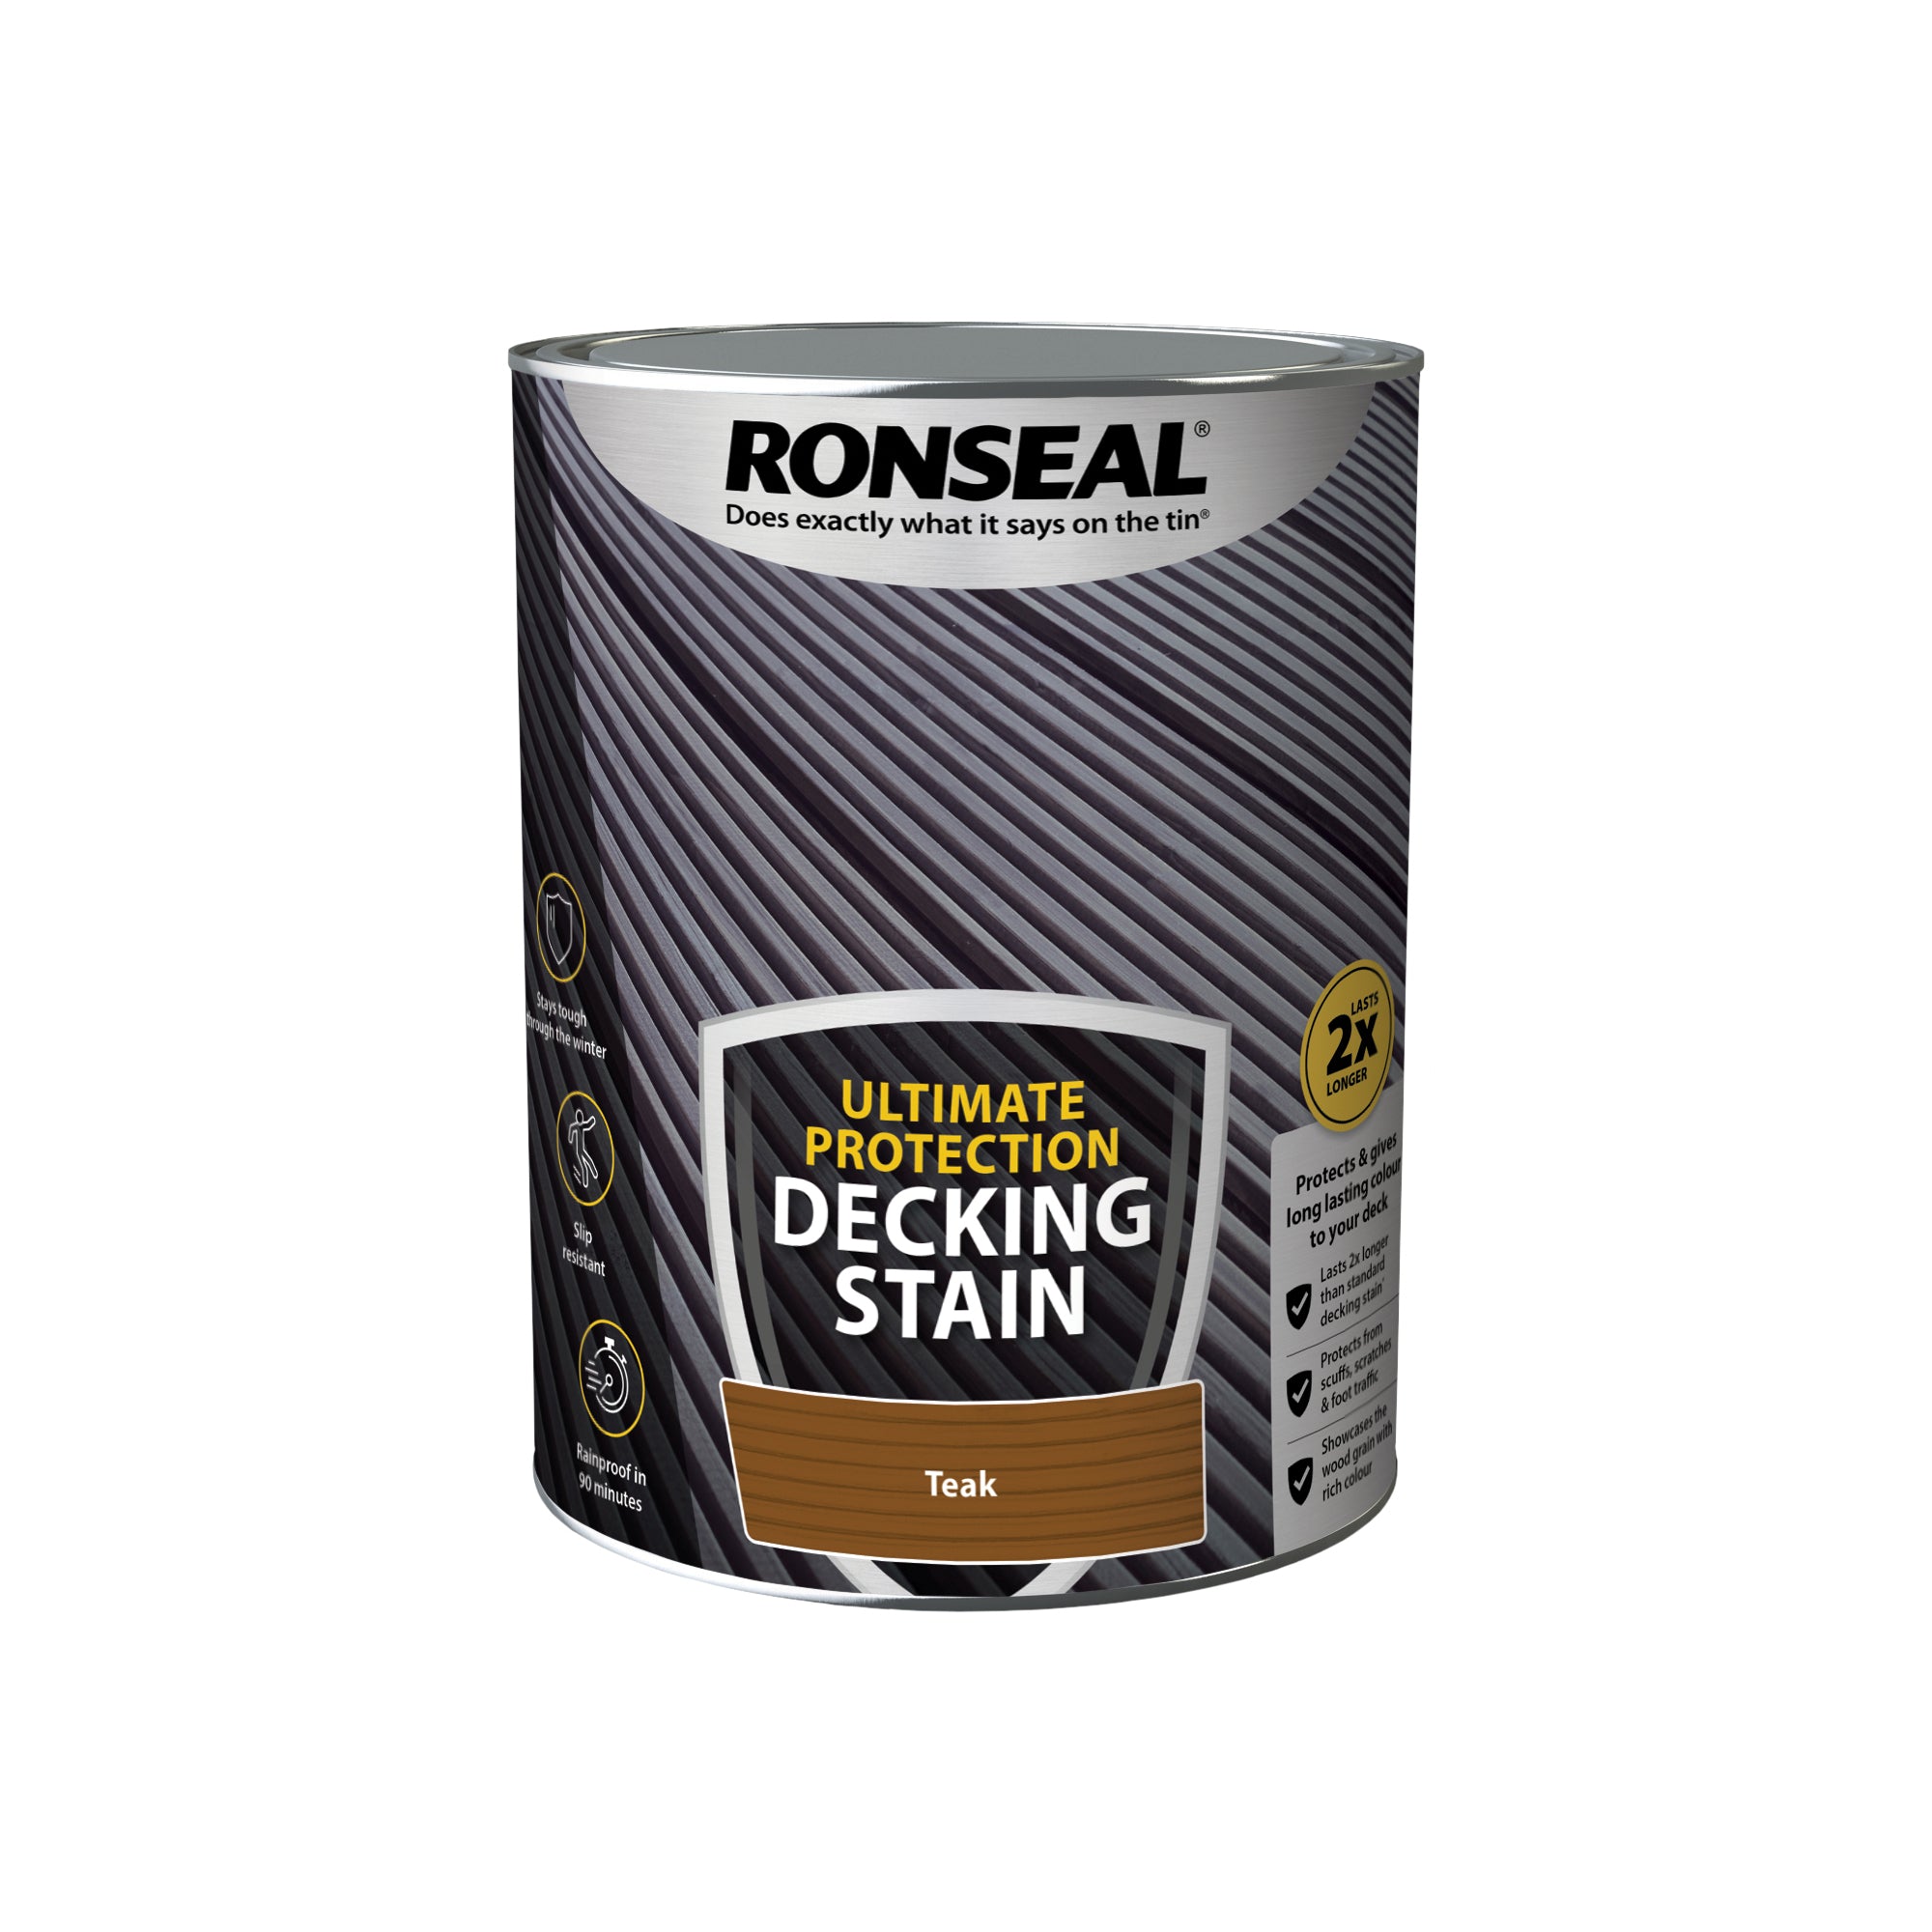 Ronseal-Ultimate-Protection-Decking-Stain-Teak-5L